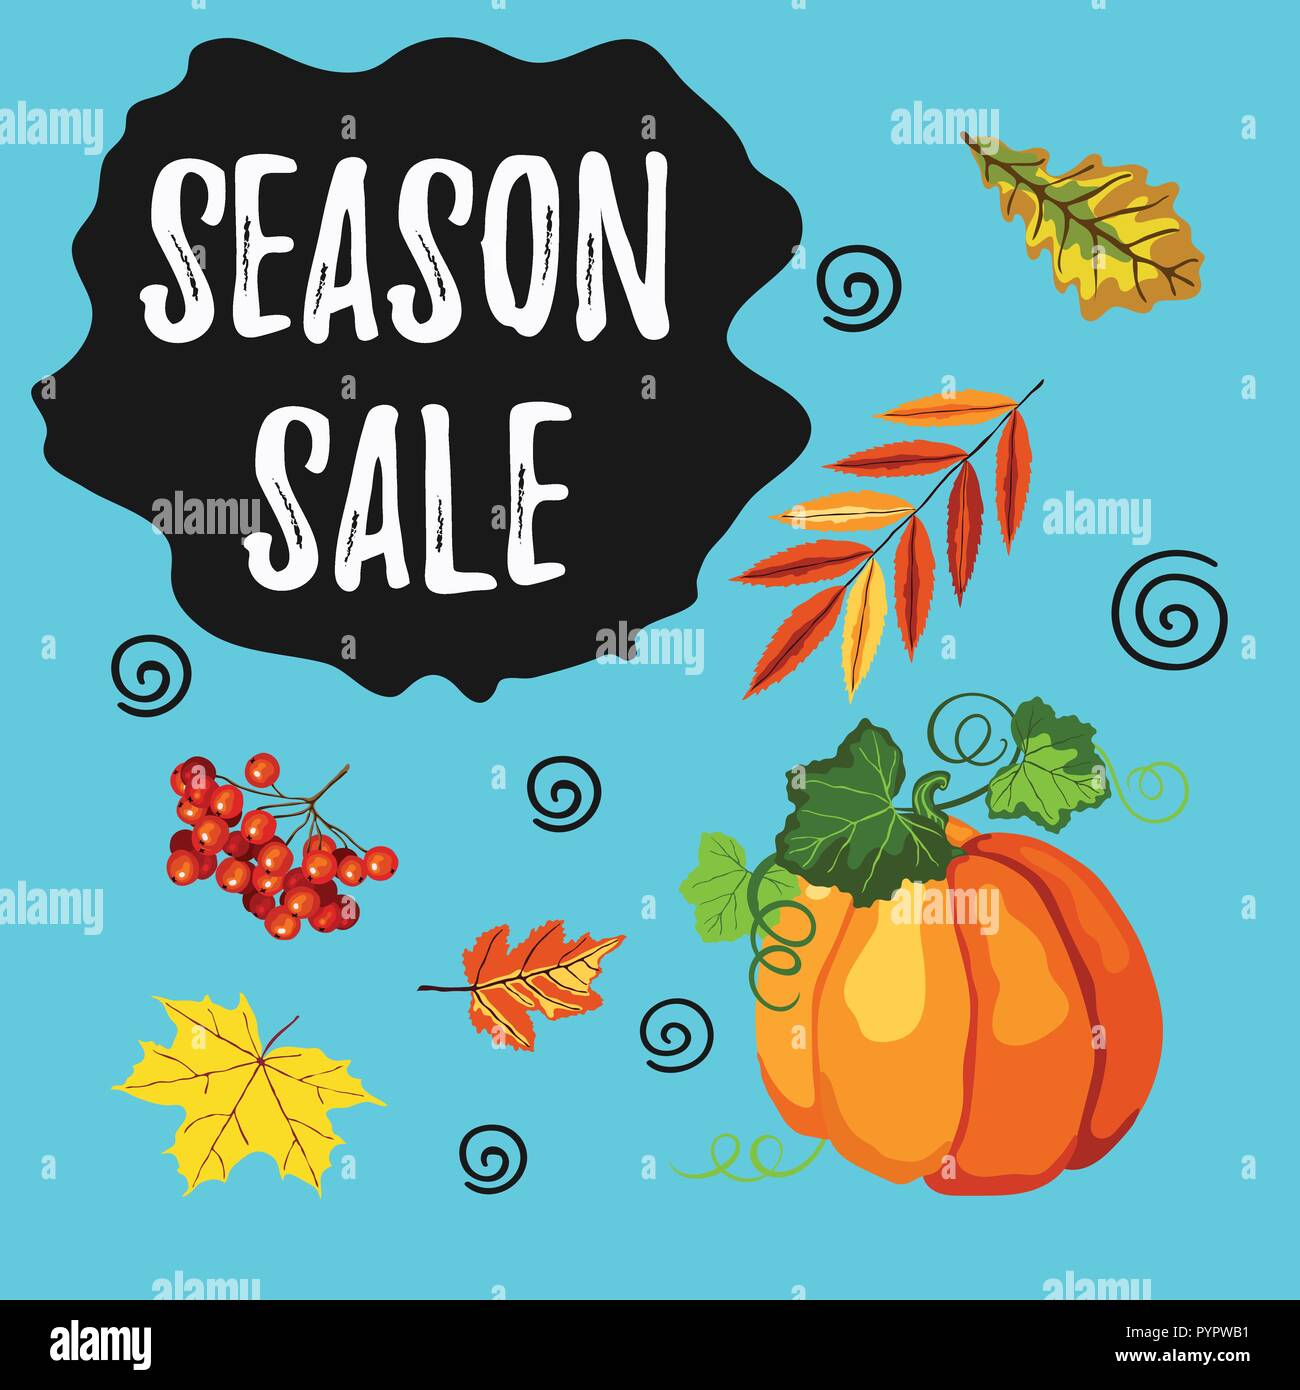 Season sale banner vector design with fall leaves, pumpkin and rowan berries on the blue background Stock Vector